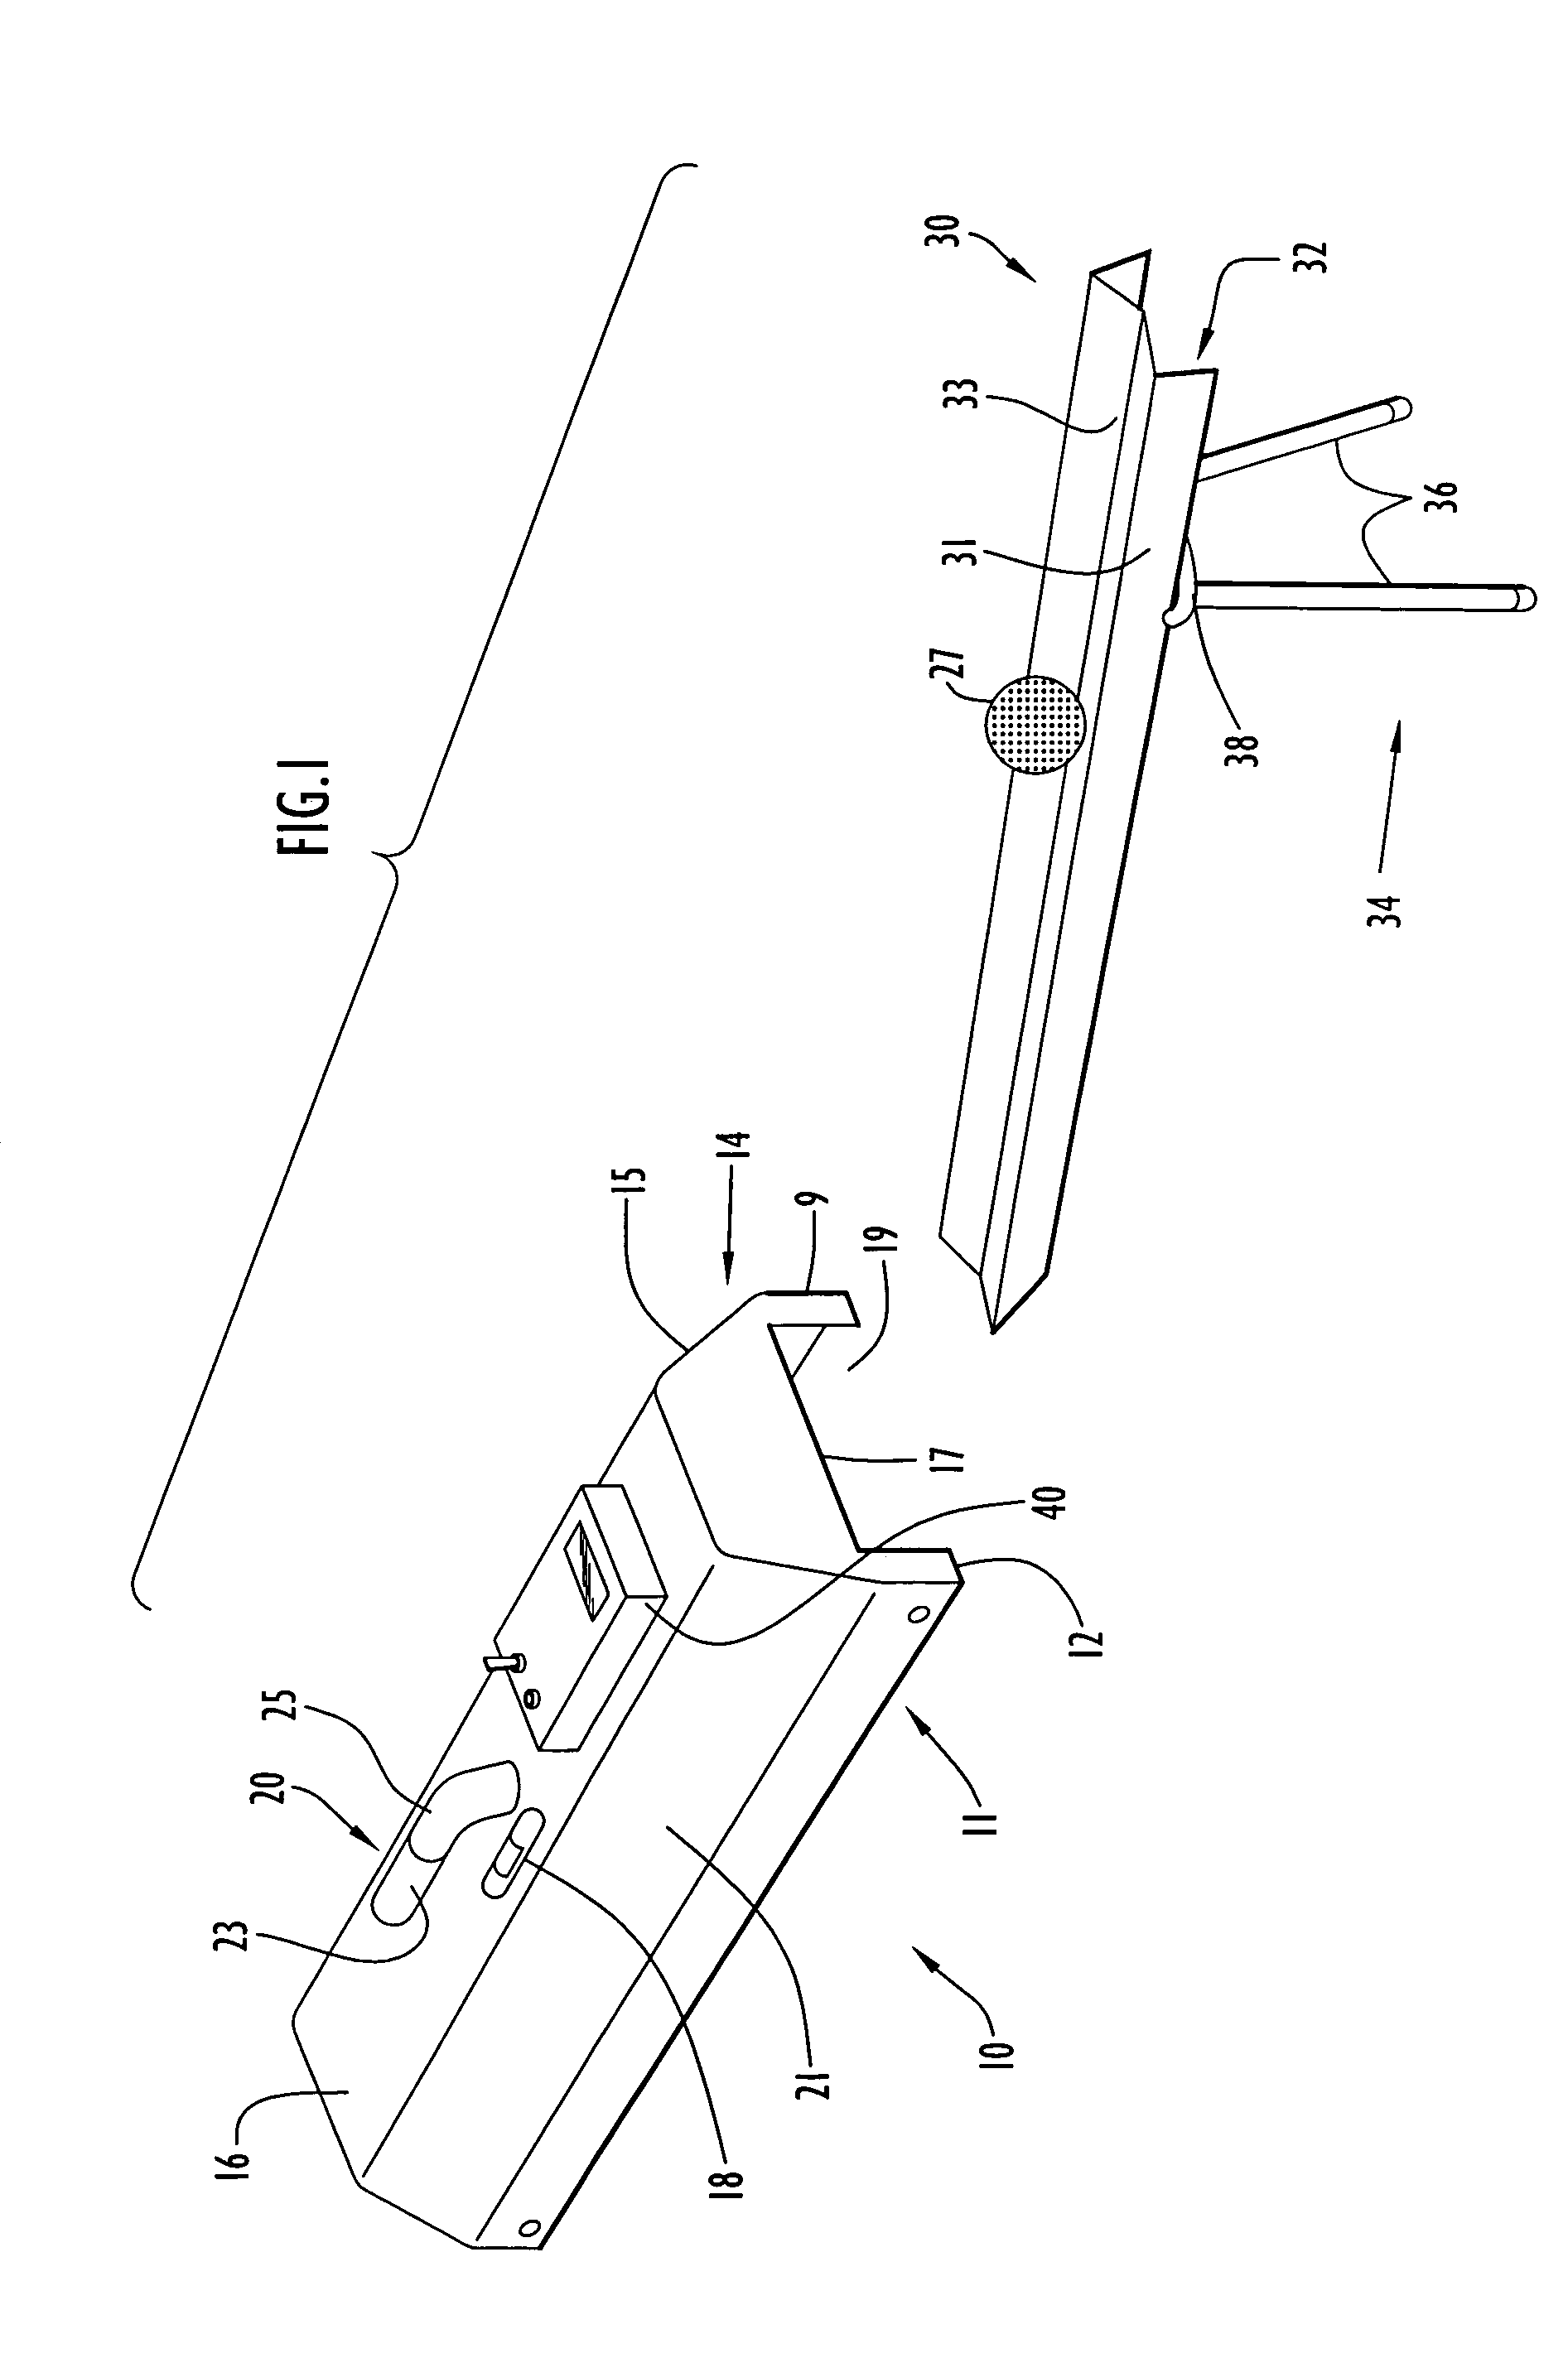 Method and apparatus for measuring the surface of a golf green